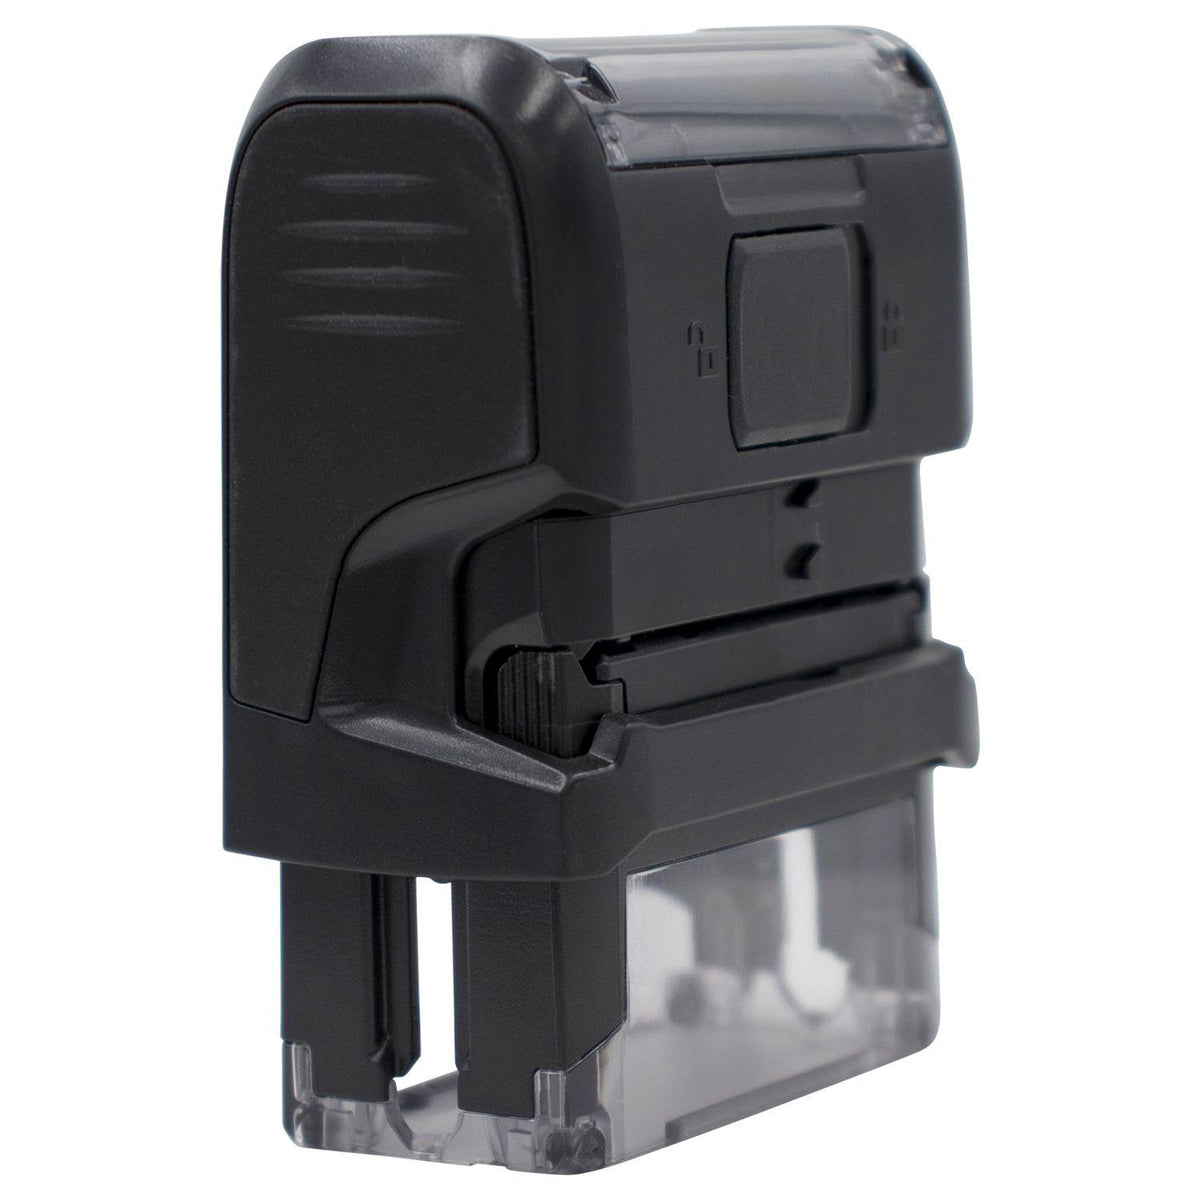 Self-Inking Special Services Stamp - Engineer Seal Stamps - Brand_Trodat, Impression Size_Small, Stamp Type_Self-Inking Stamp, Type of Use_Business, Type of Use_Shipping &amp; Receiving